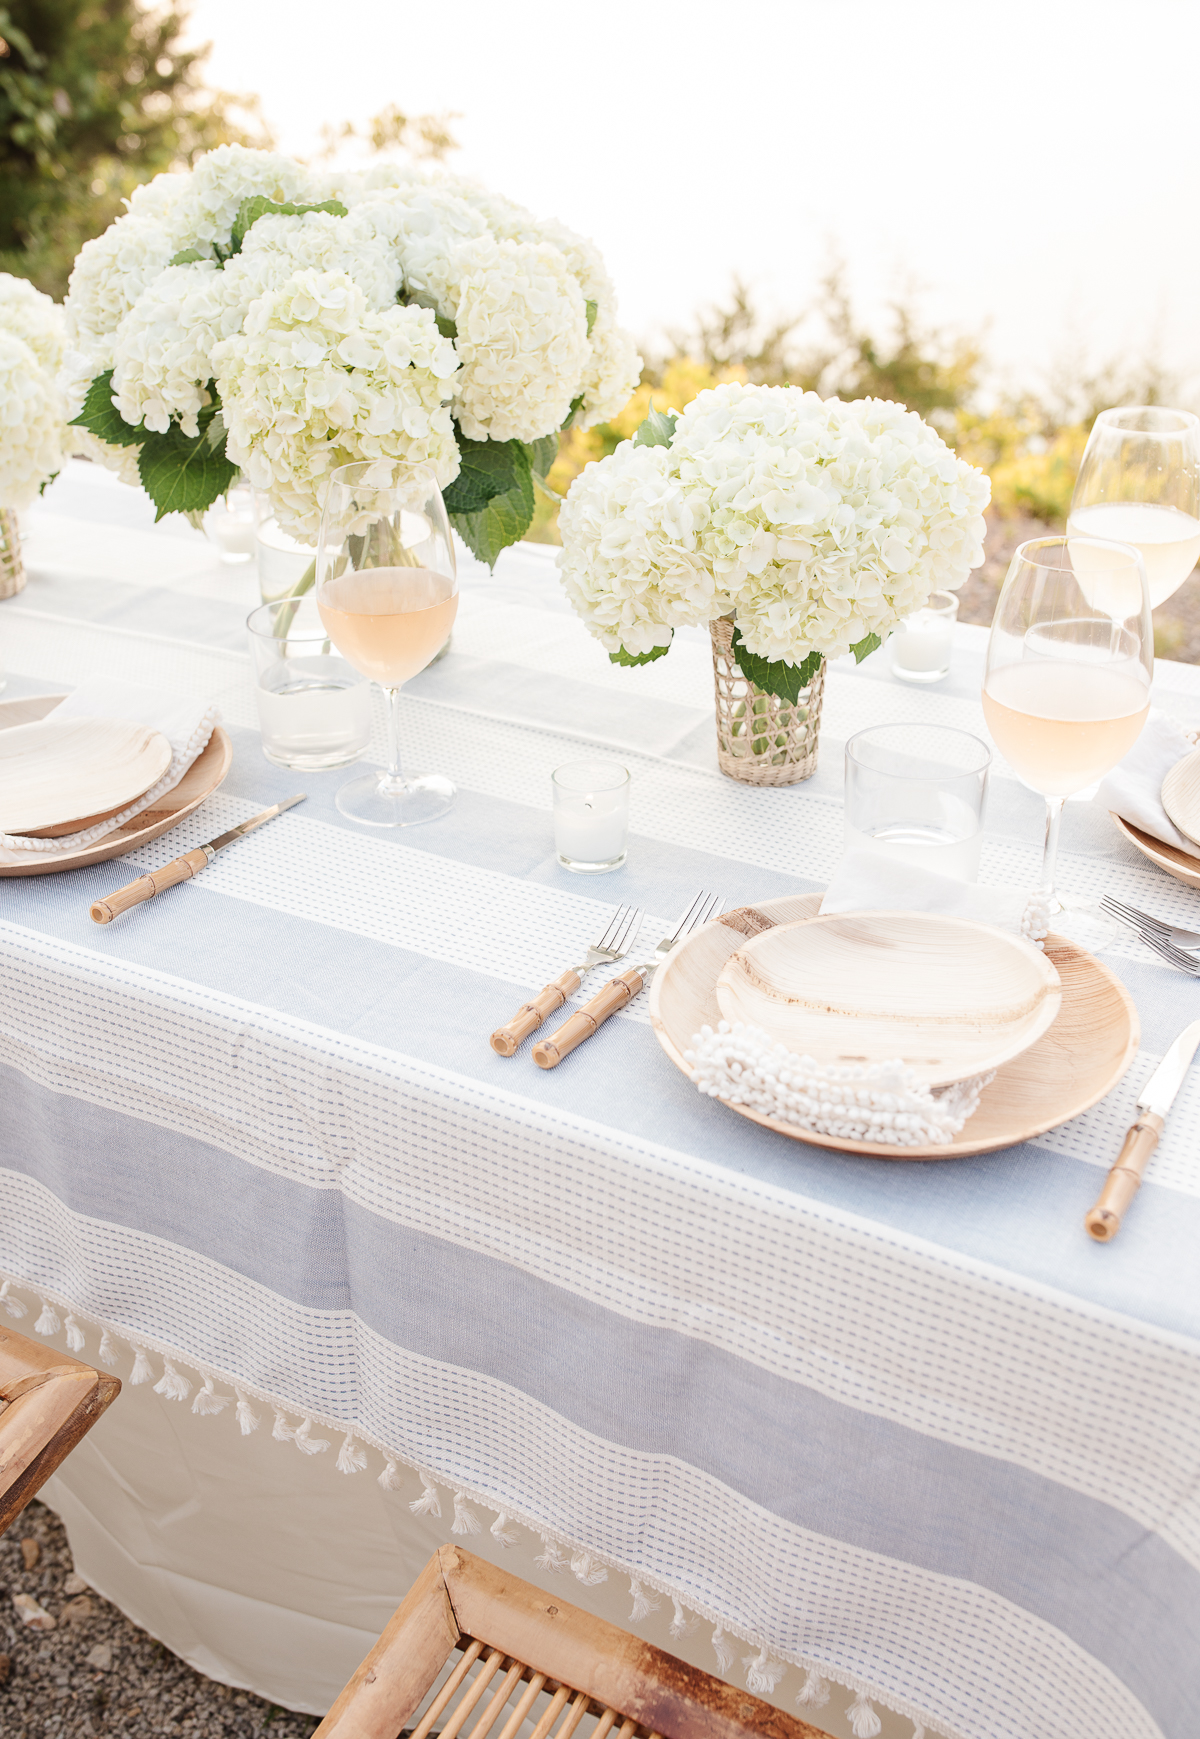 Elegant outdoor dining setup with a blue lace tablecloth, white hydrangea centerpieces, and bamboo chairs.